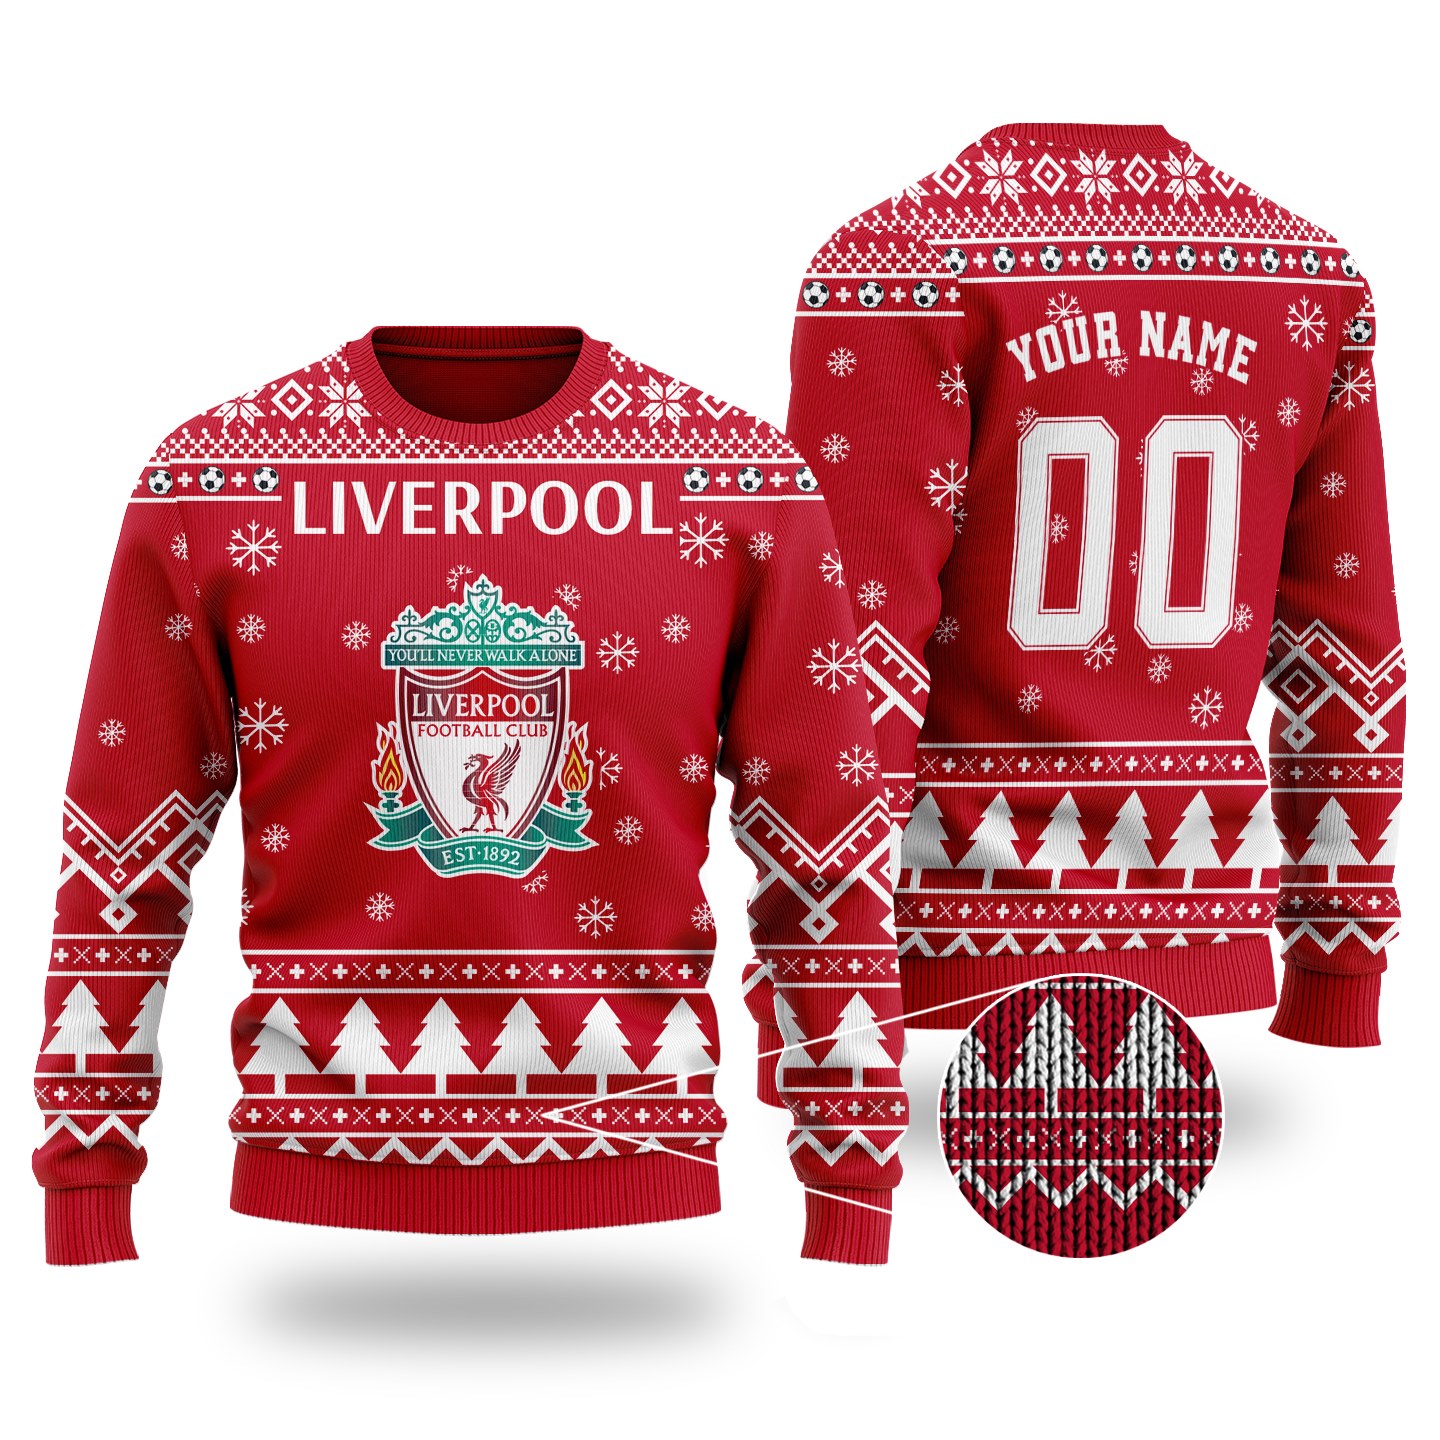 LiverPool Youll Never Walk Alone Football Club EST 1892 Personalized Custom Sweater